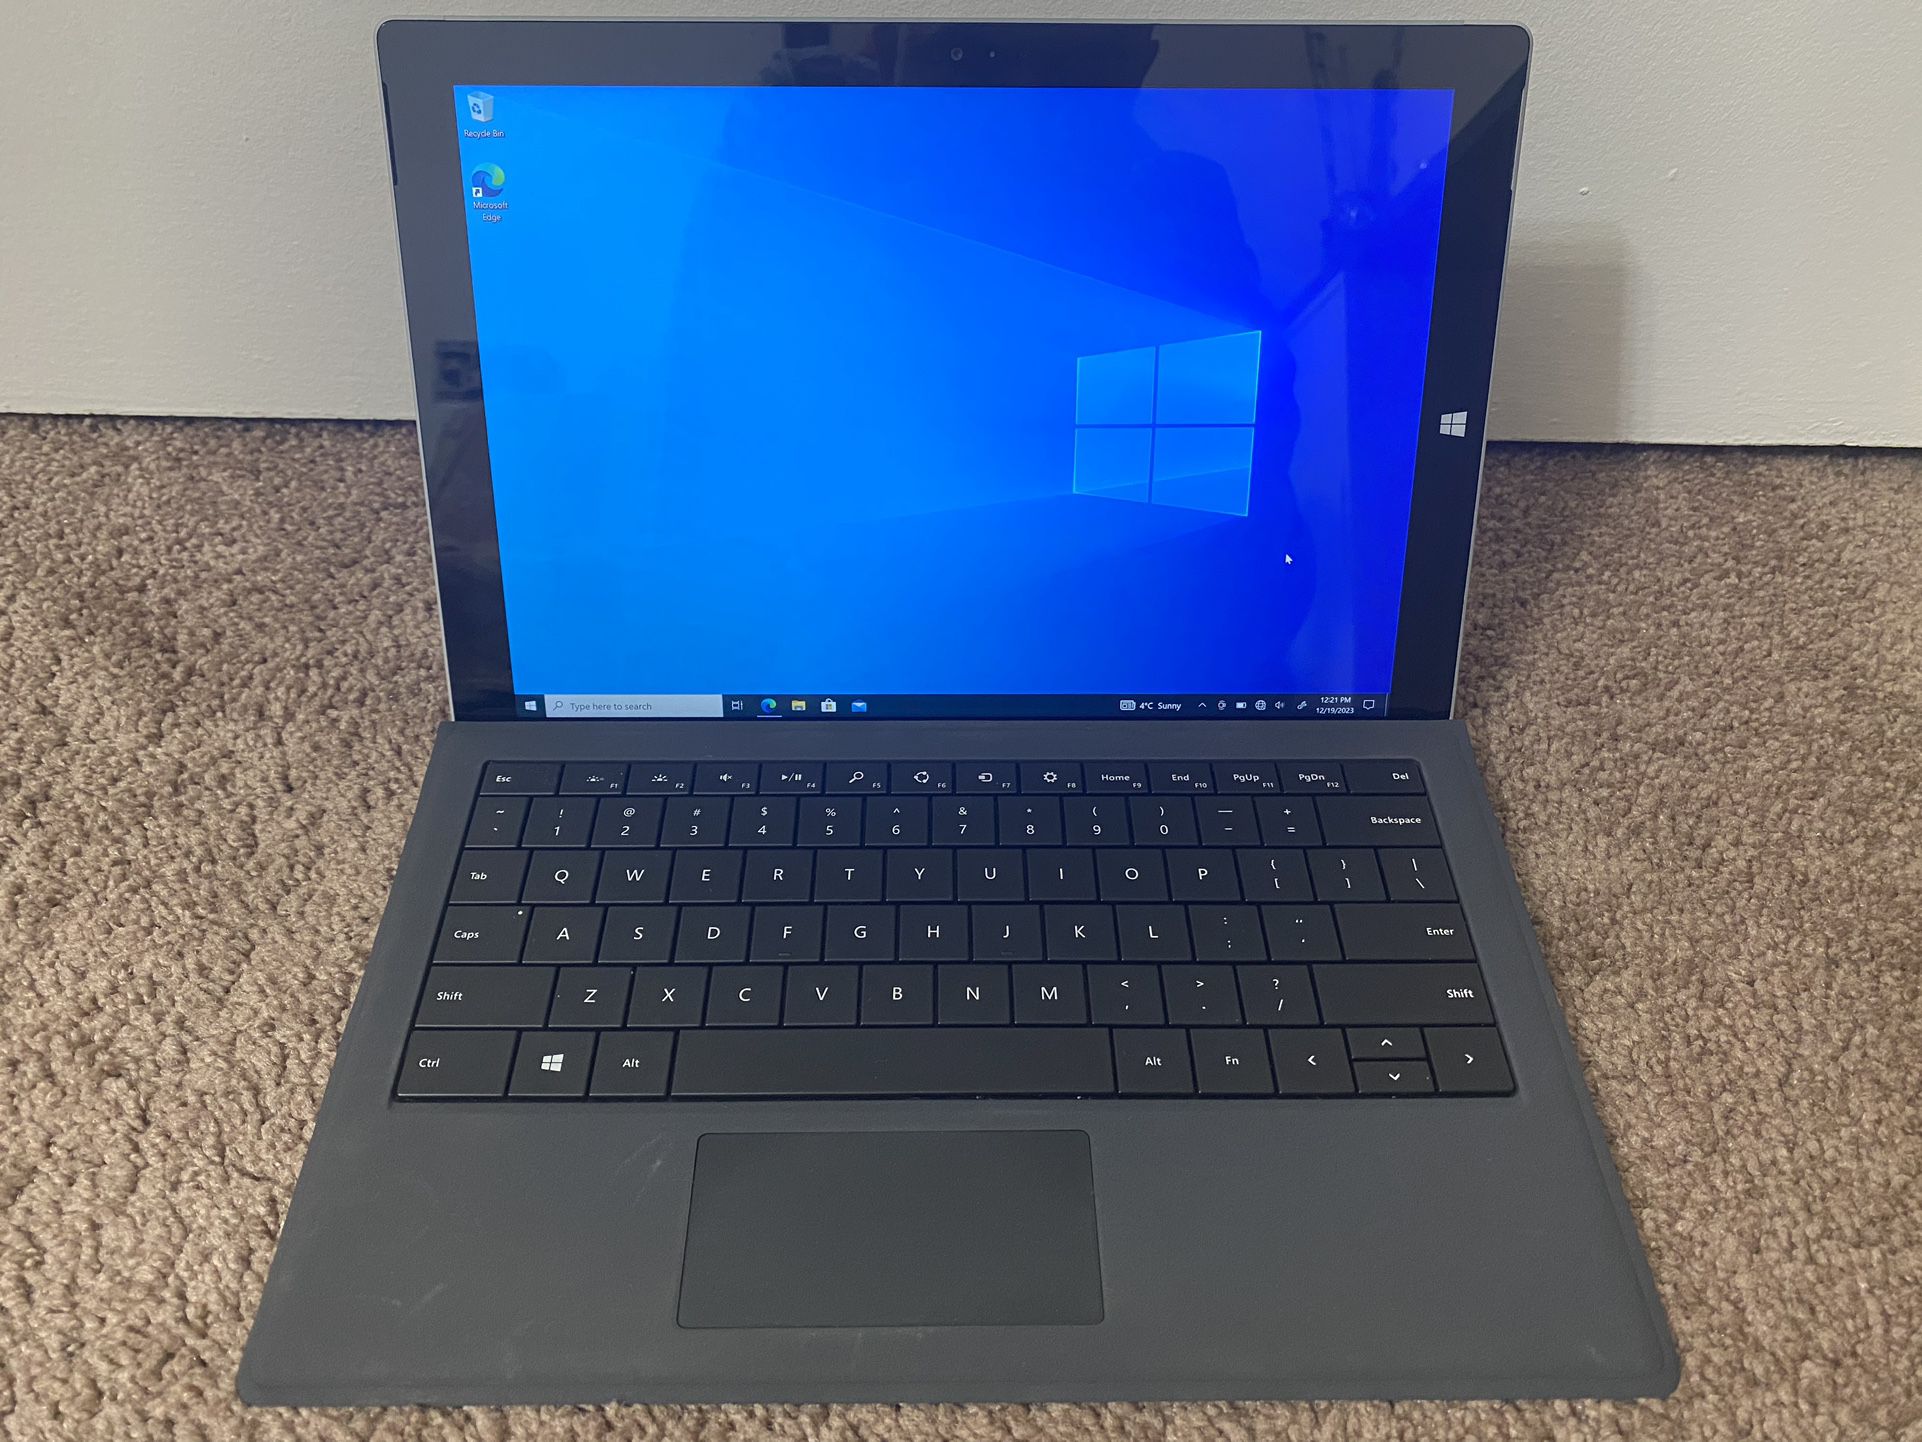 FIRM: Microsoft Surface Tablet Laptop PC Computer i5 4GB RAM 128GB SSD